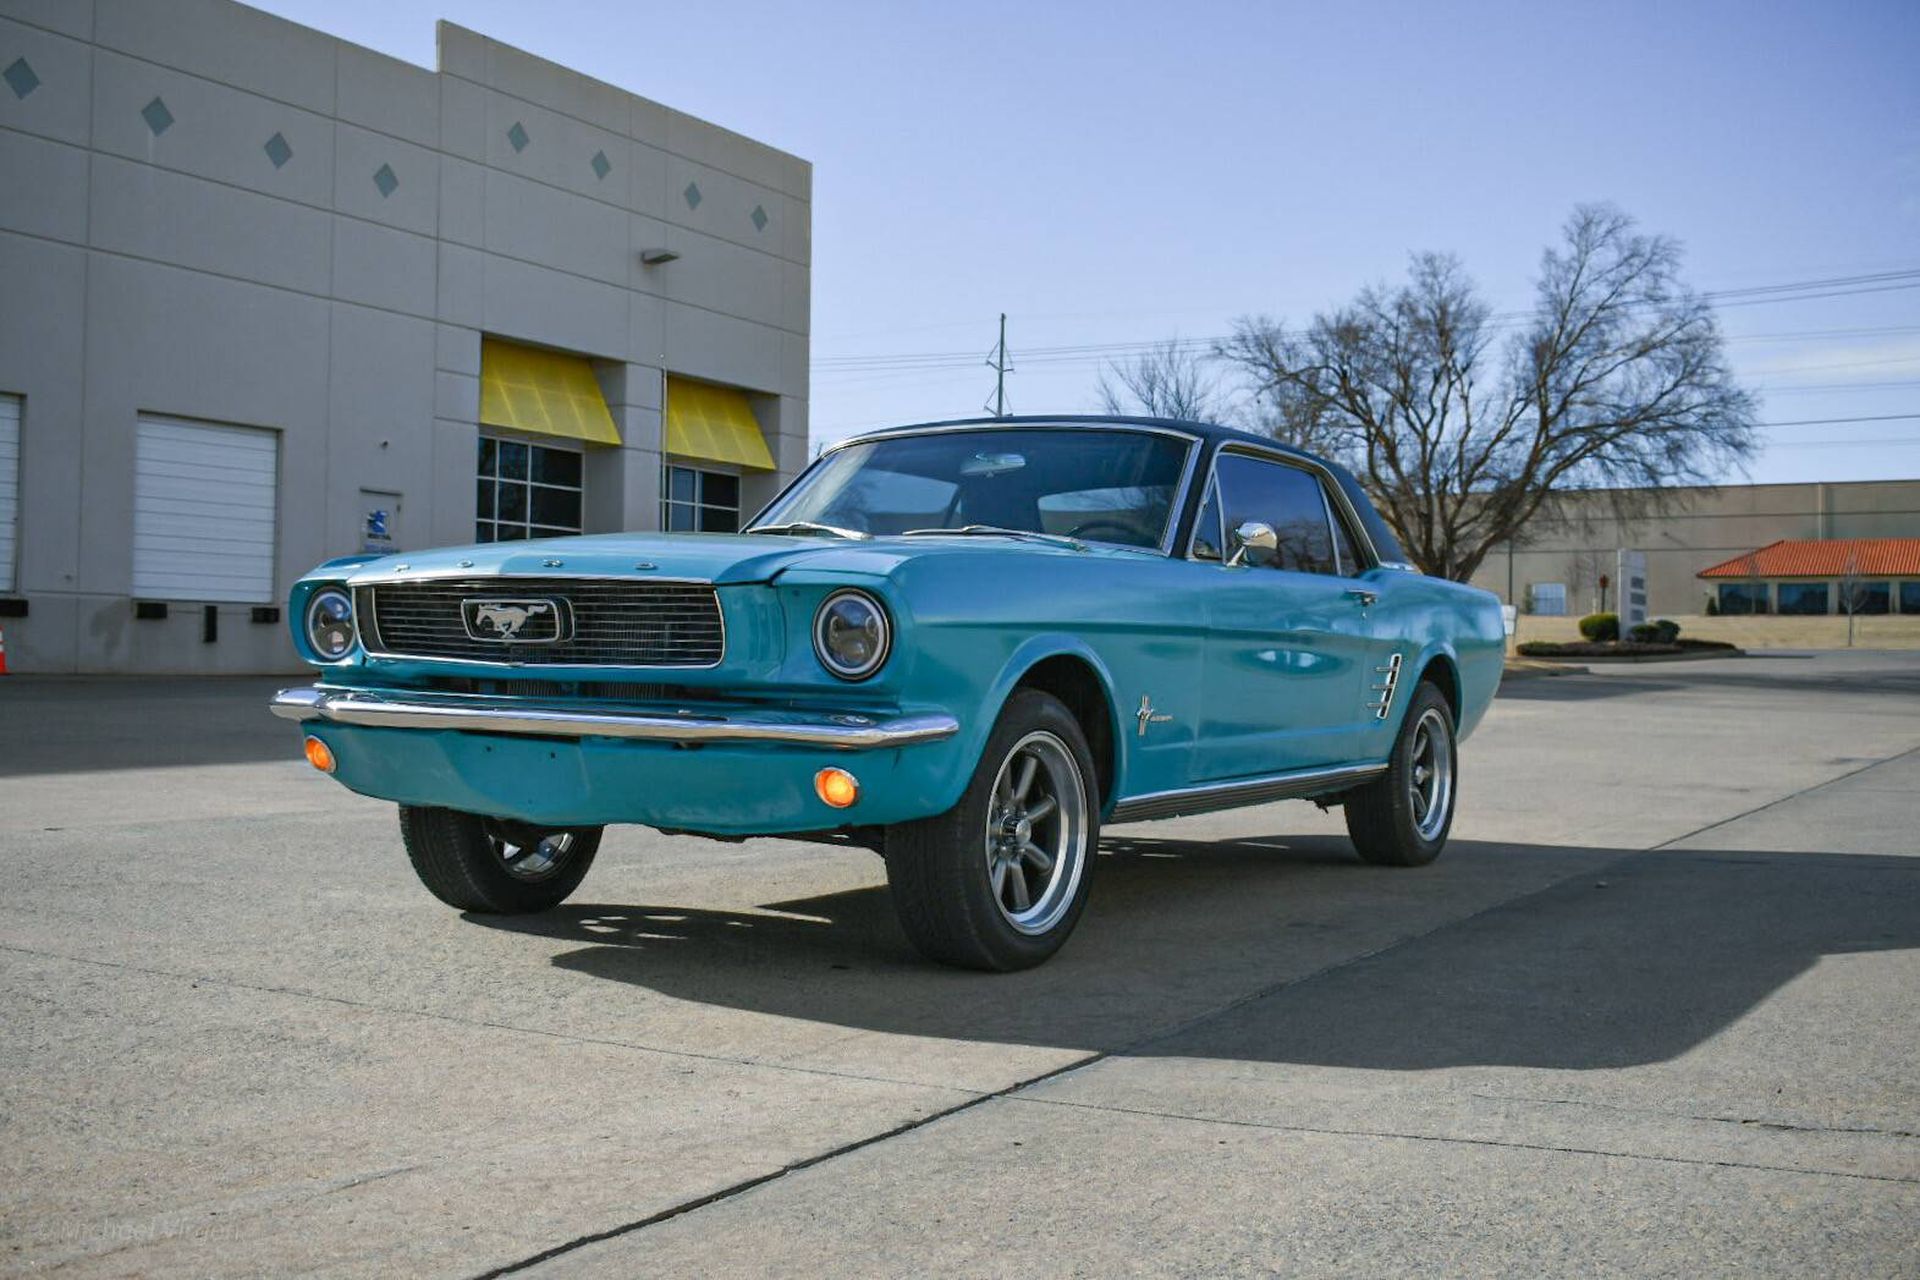 1966 Ford Mustang Coupe: A Classic Icon